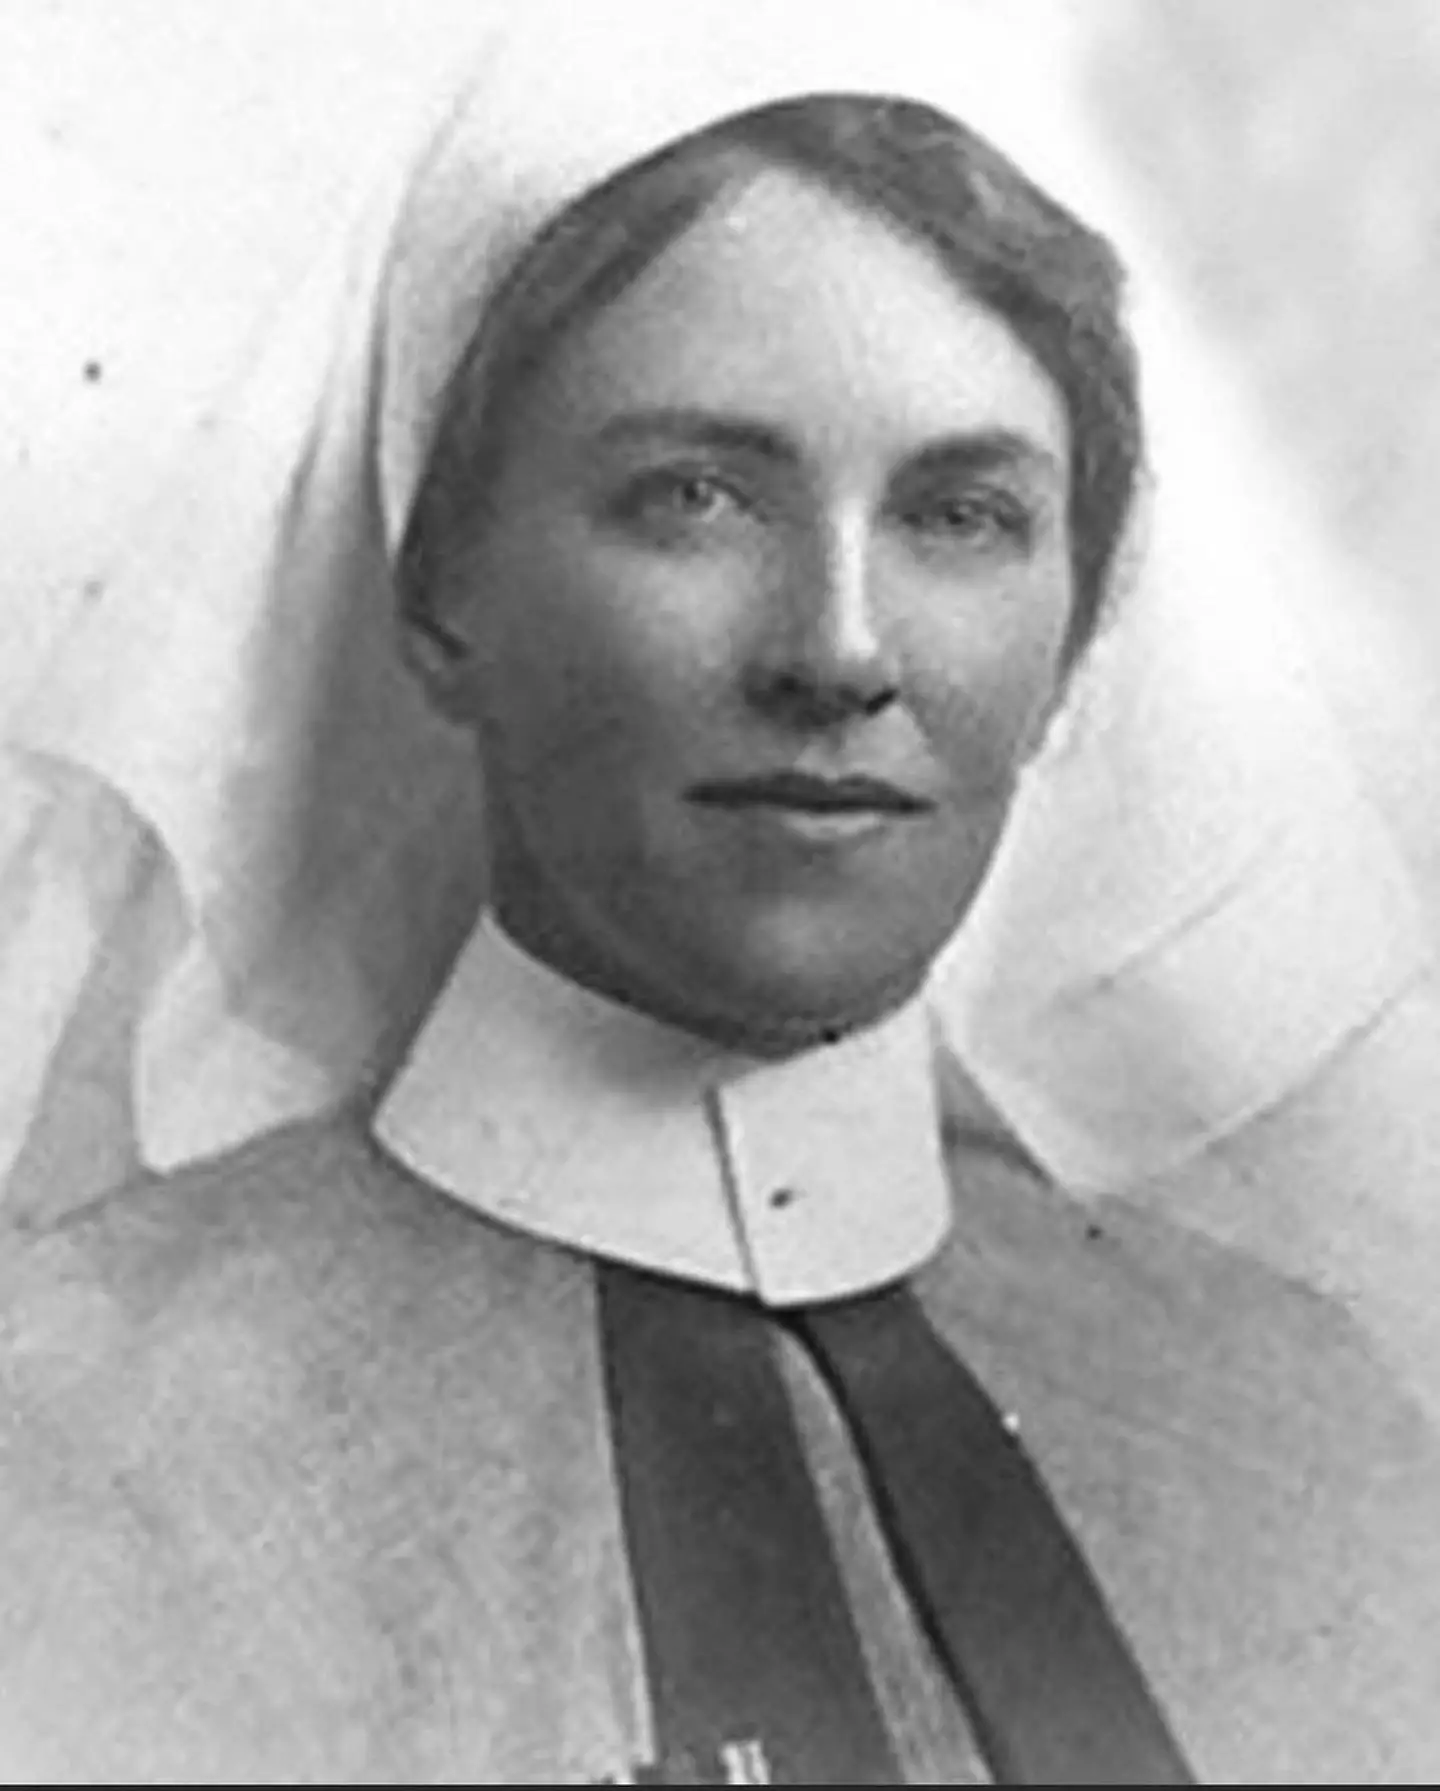 Mary was a nurse and went on to have four children with her husband Thomas before his death.